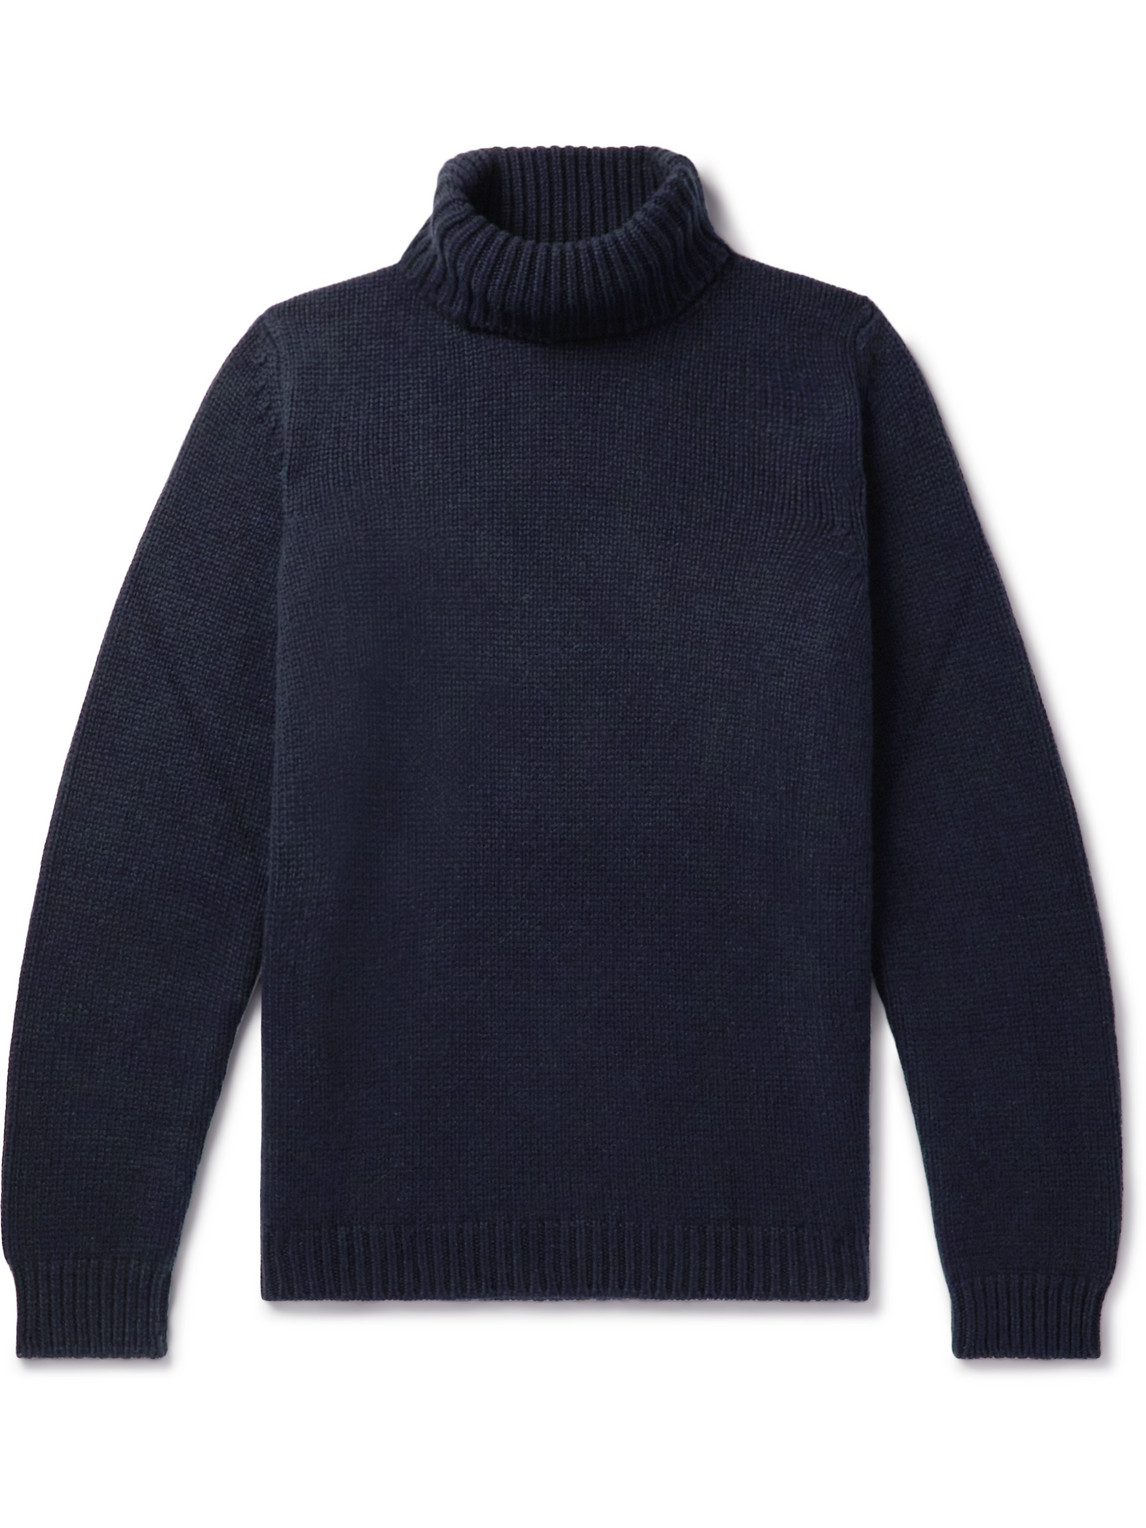 ANDERSON & SHEPPARD CASHMERE TURTLENECK SWEATER